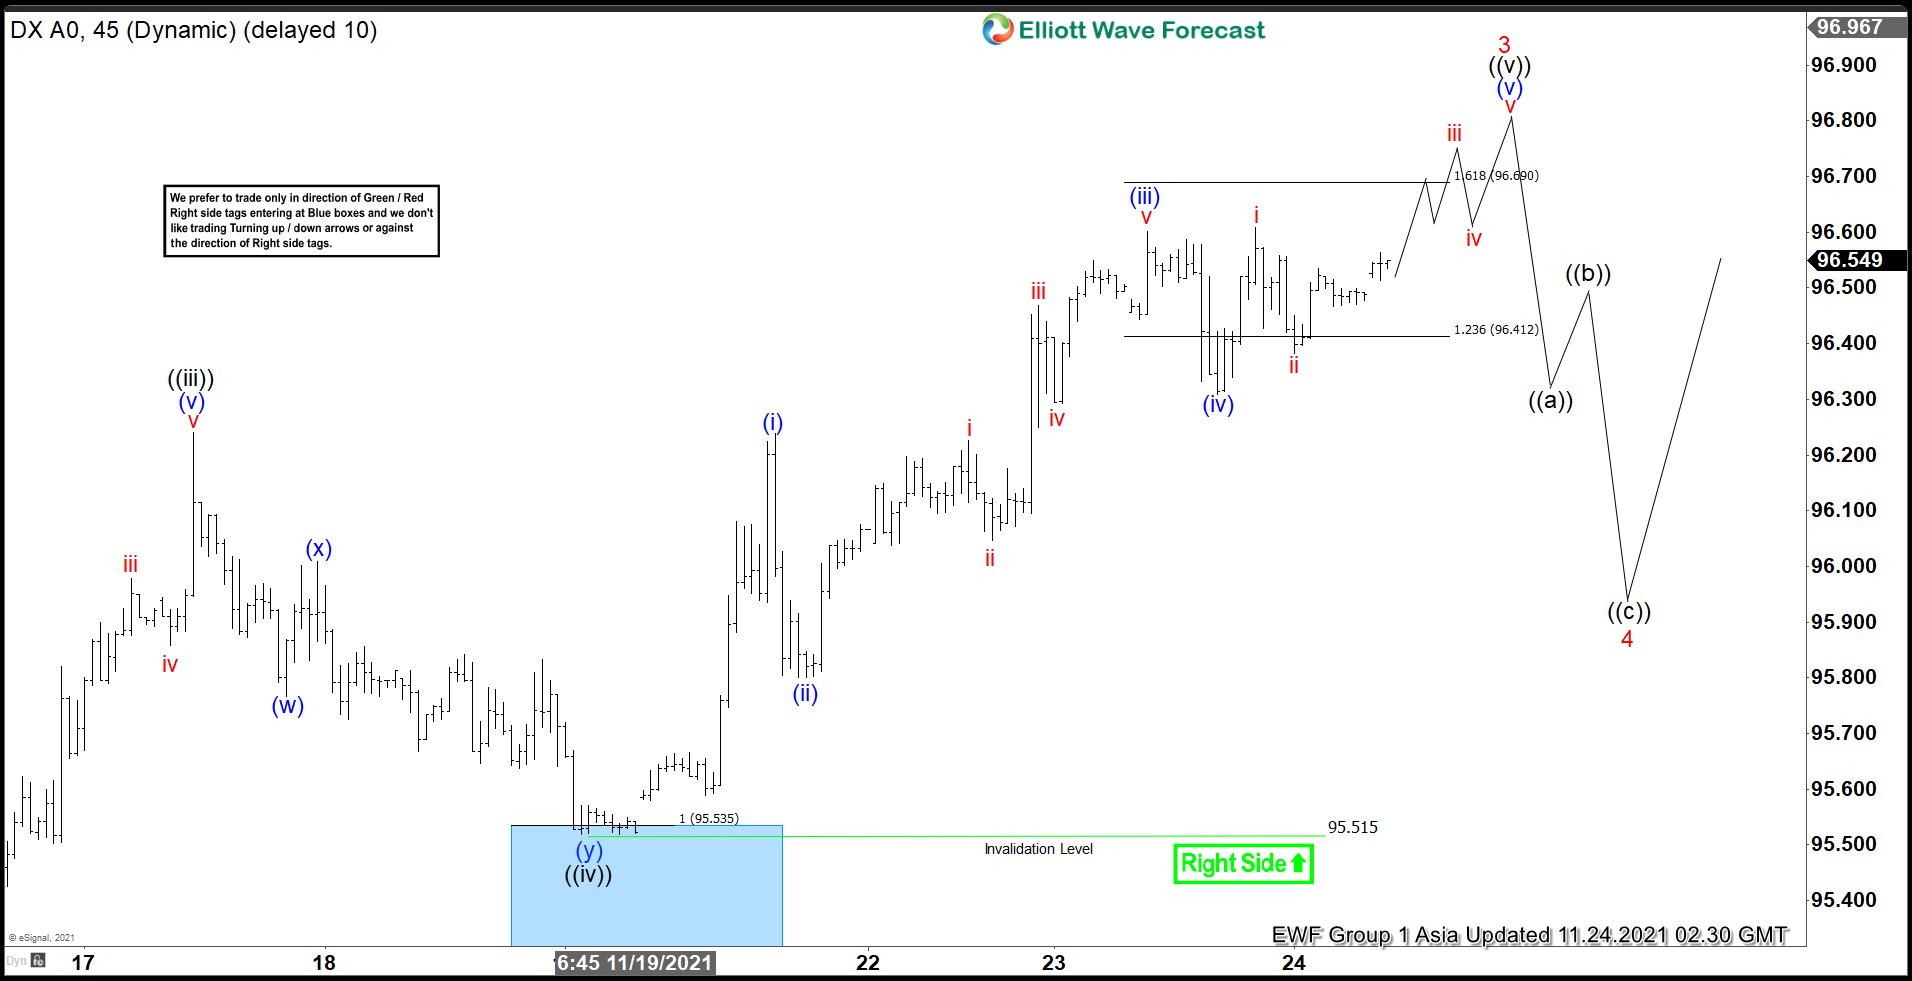 Elliott Wave View: Dollar Index (DXY) Could Extend the Rally Higher